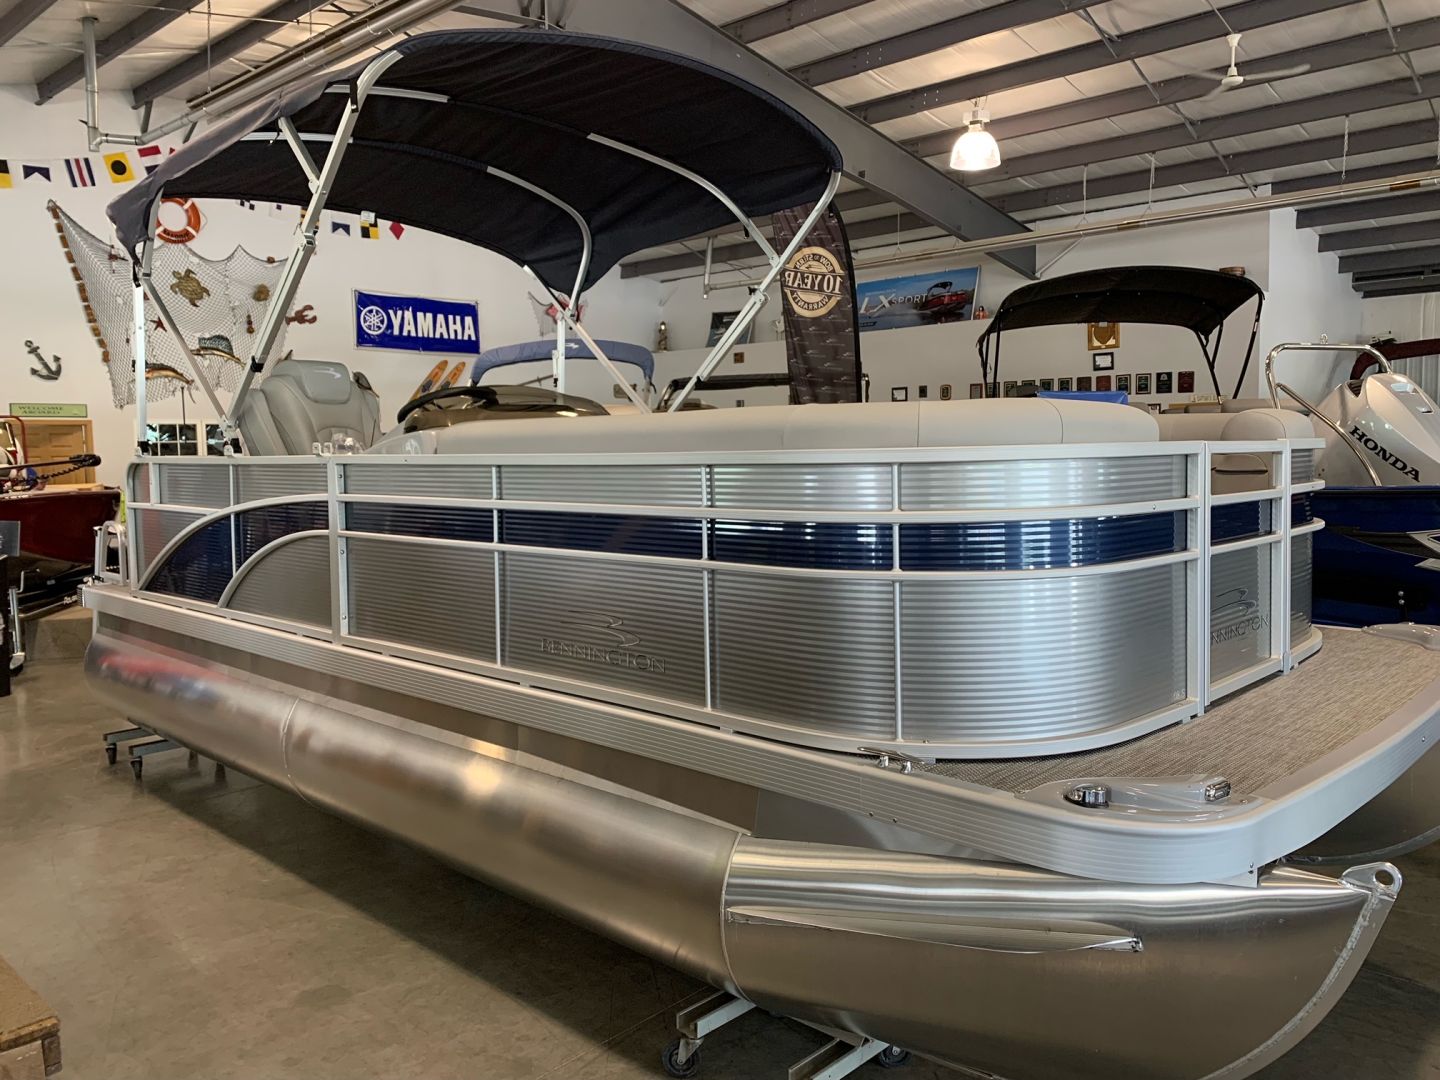 Why Buy a Used Boat for Sale During a Kalamazoo Winter?